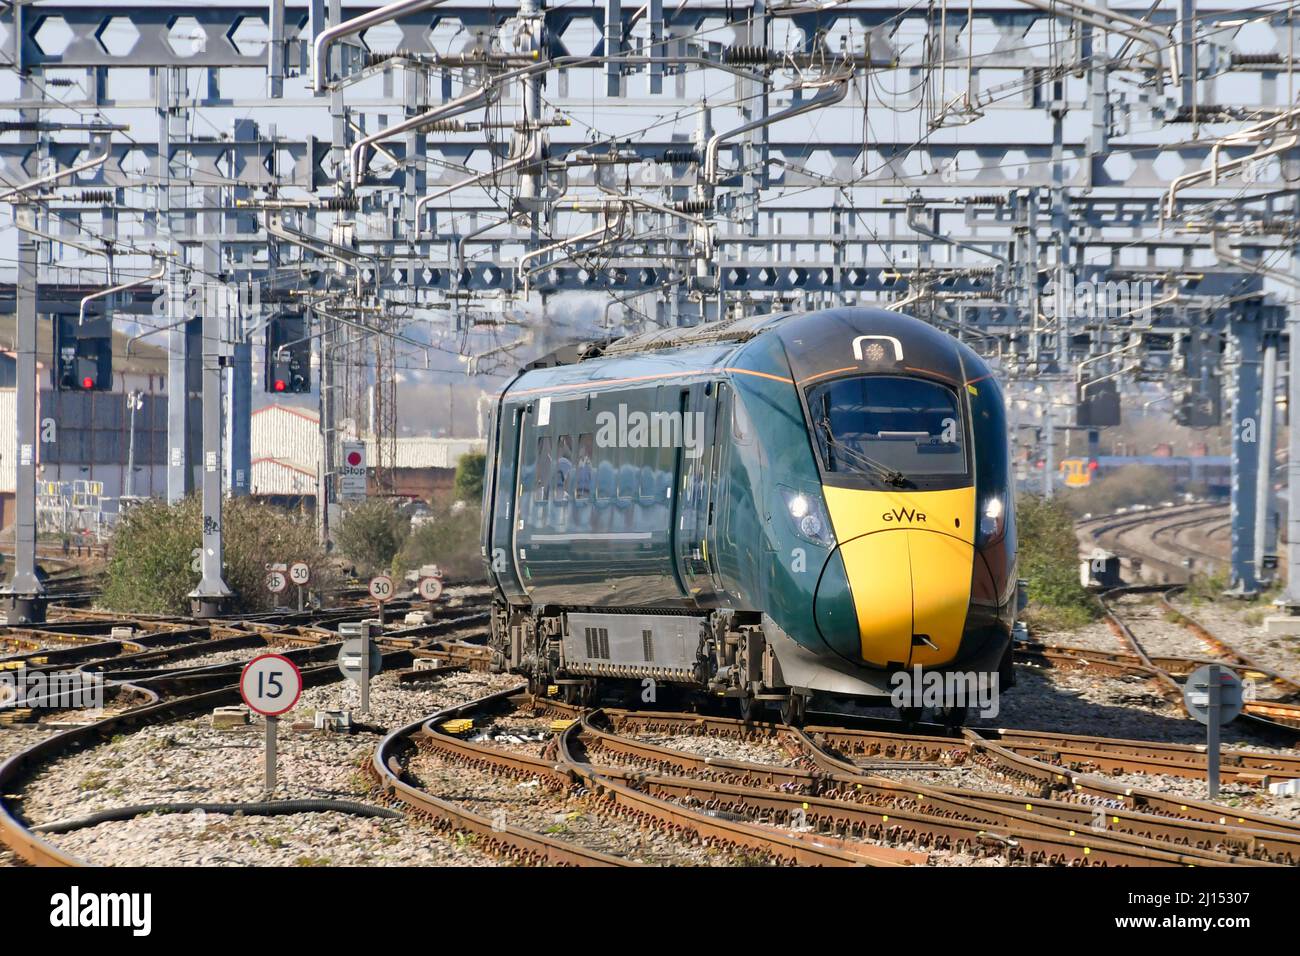 Cardiff, Wales - March 2022: Class 800 high speed train operated by Great Western railway approaching Cardiff Central railway station under wires Stock Photo